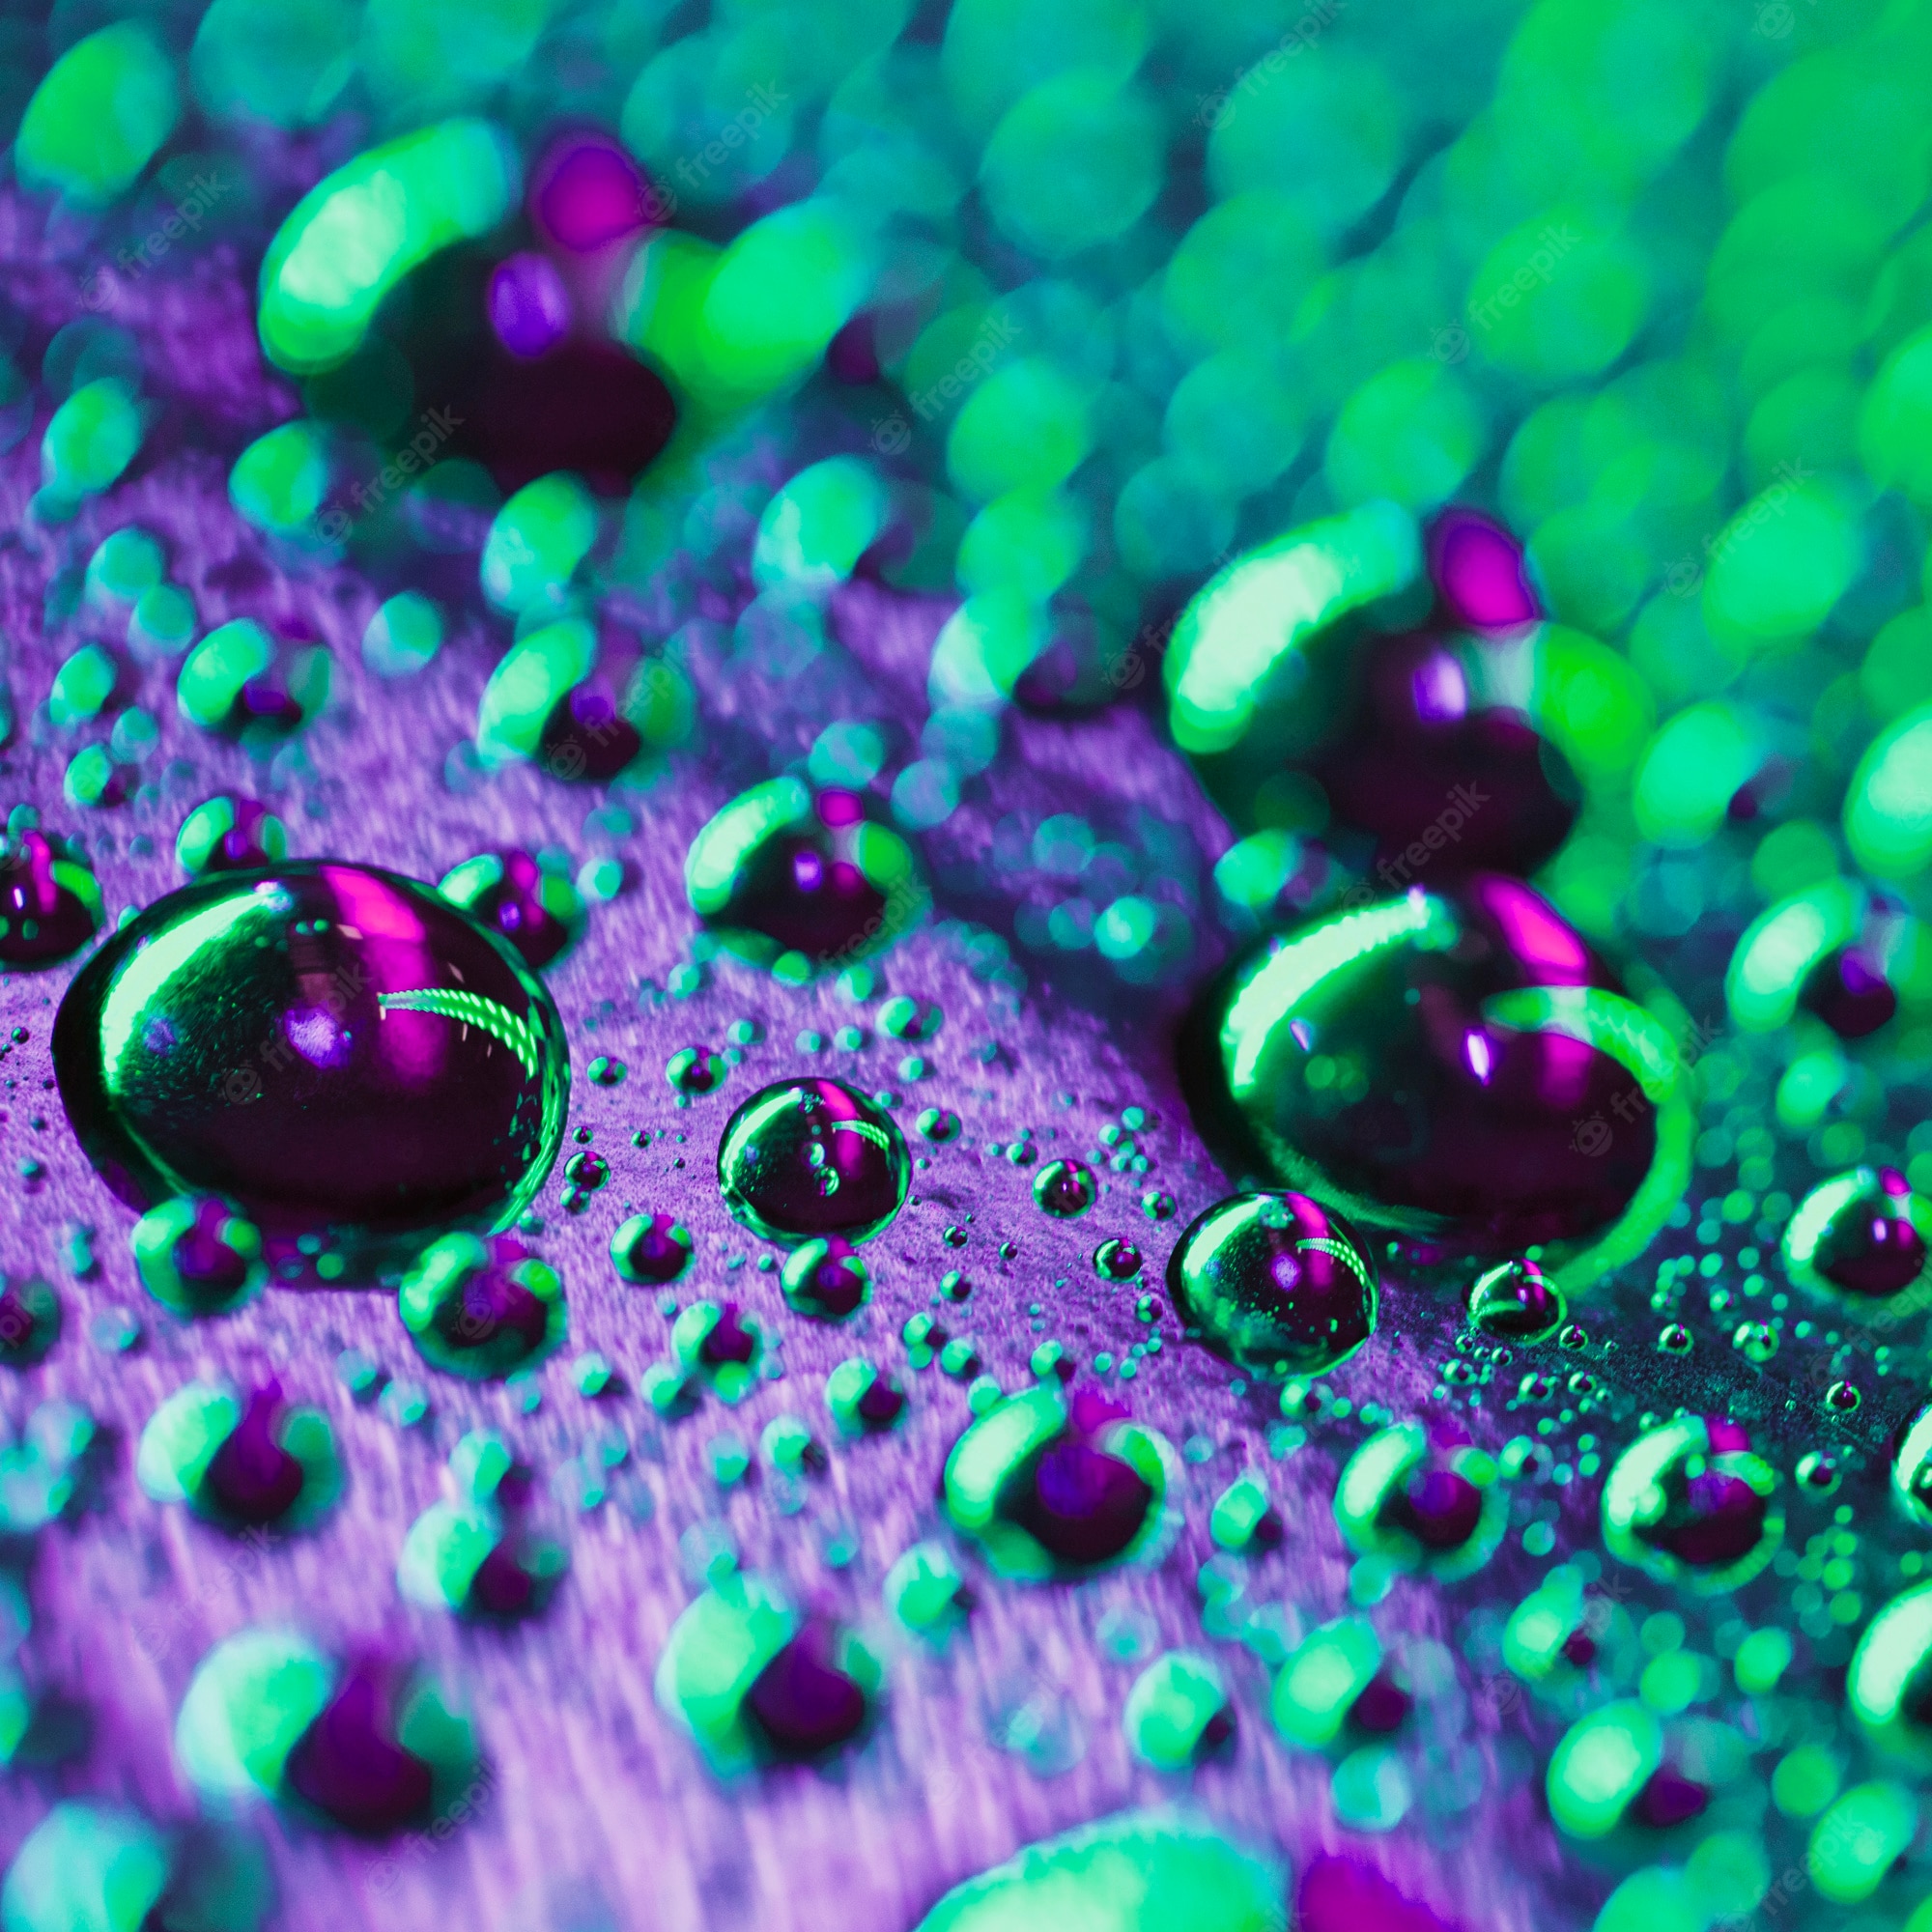 Purple And Green Abstract Background